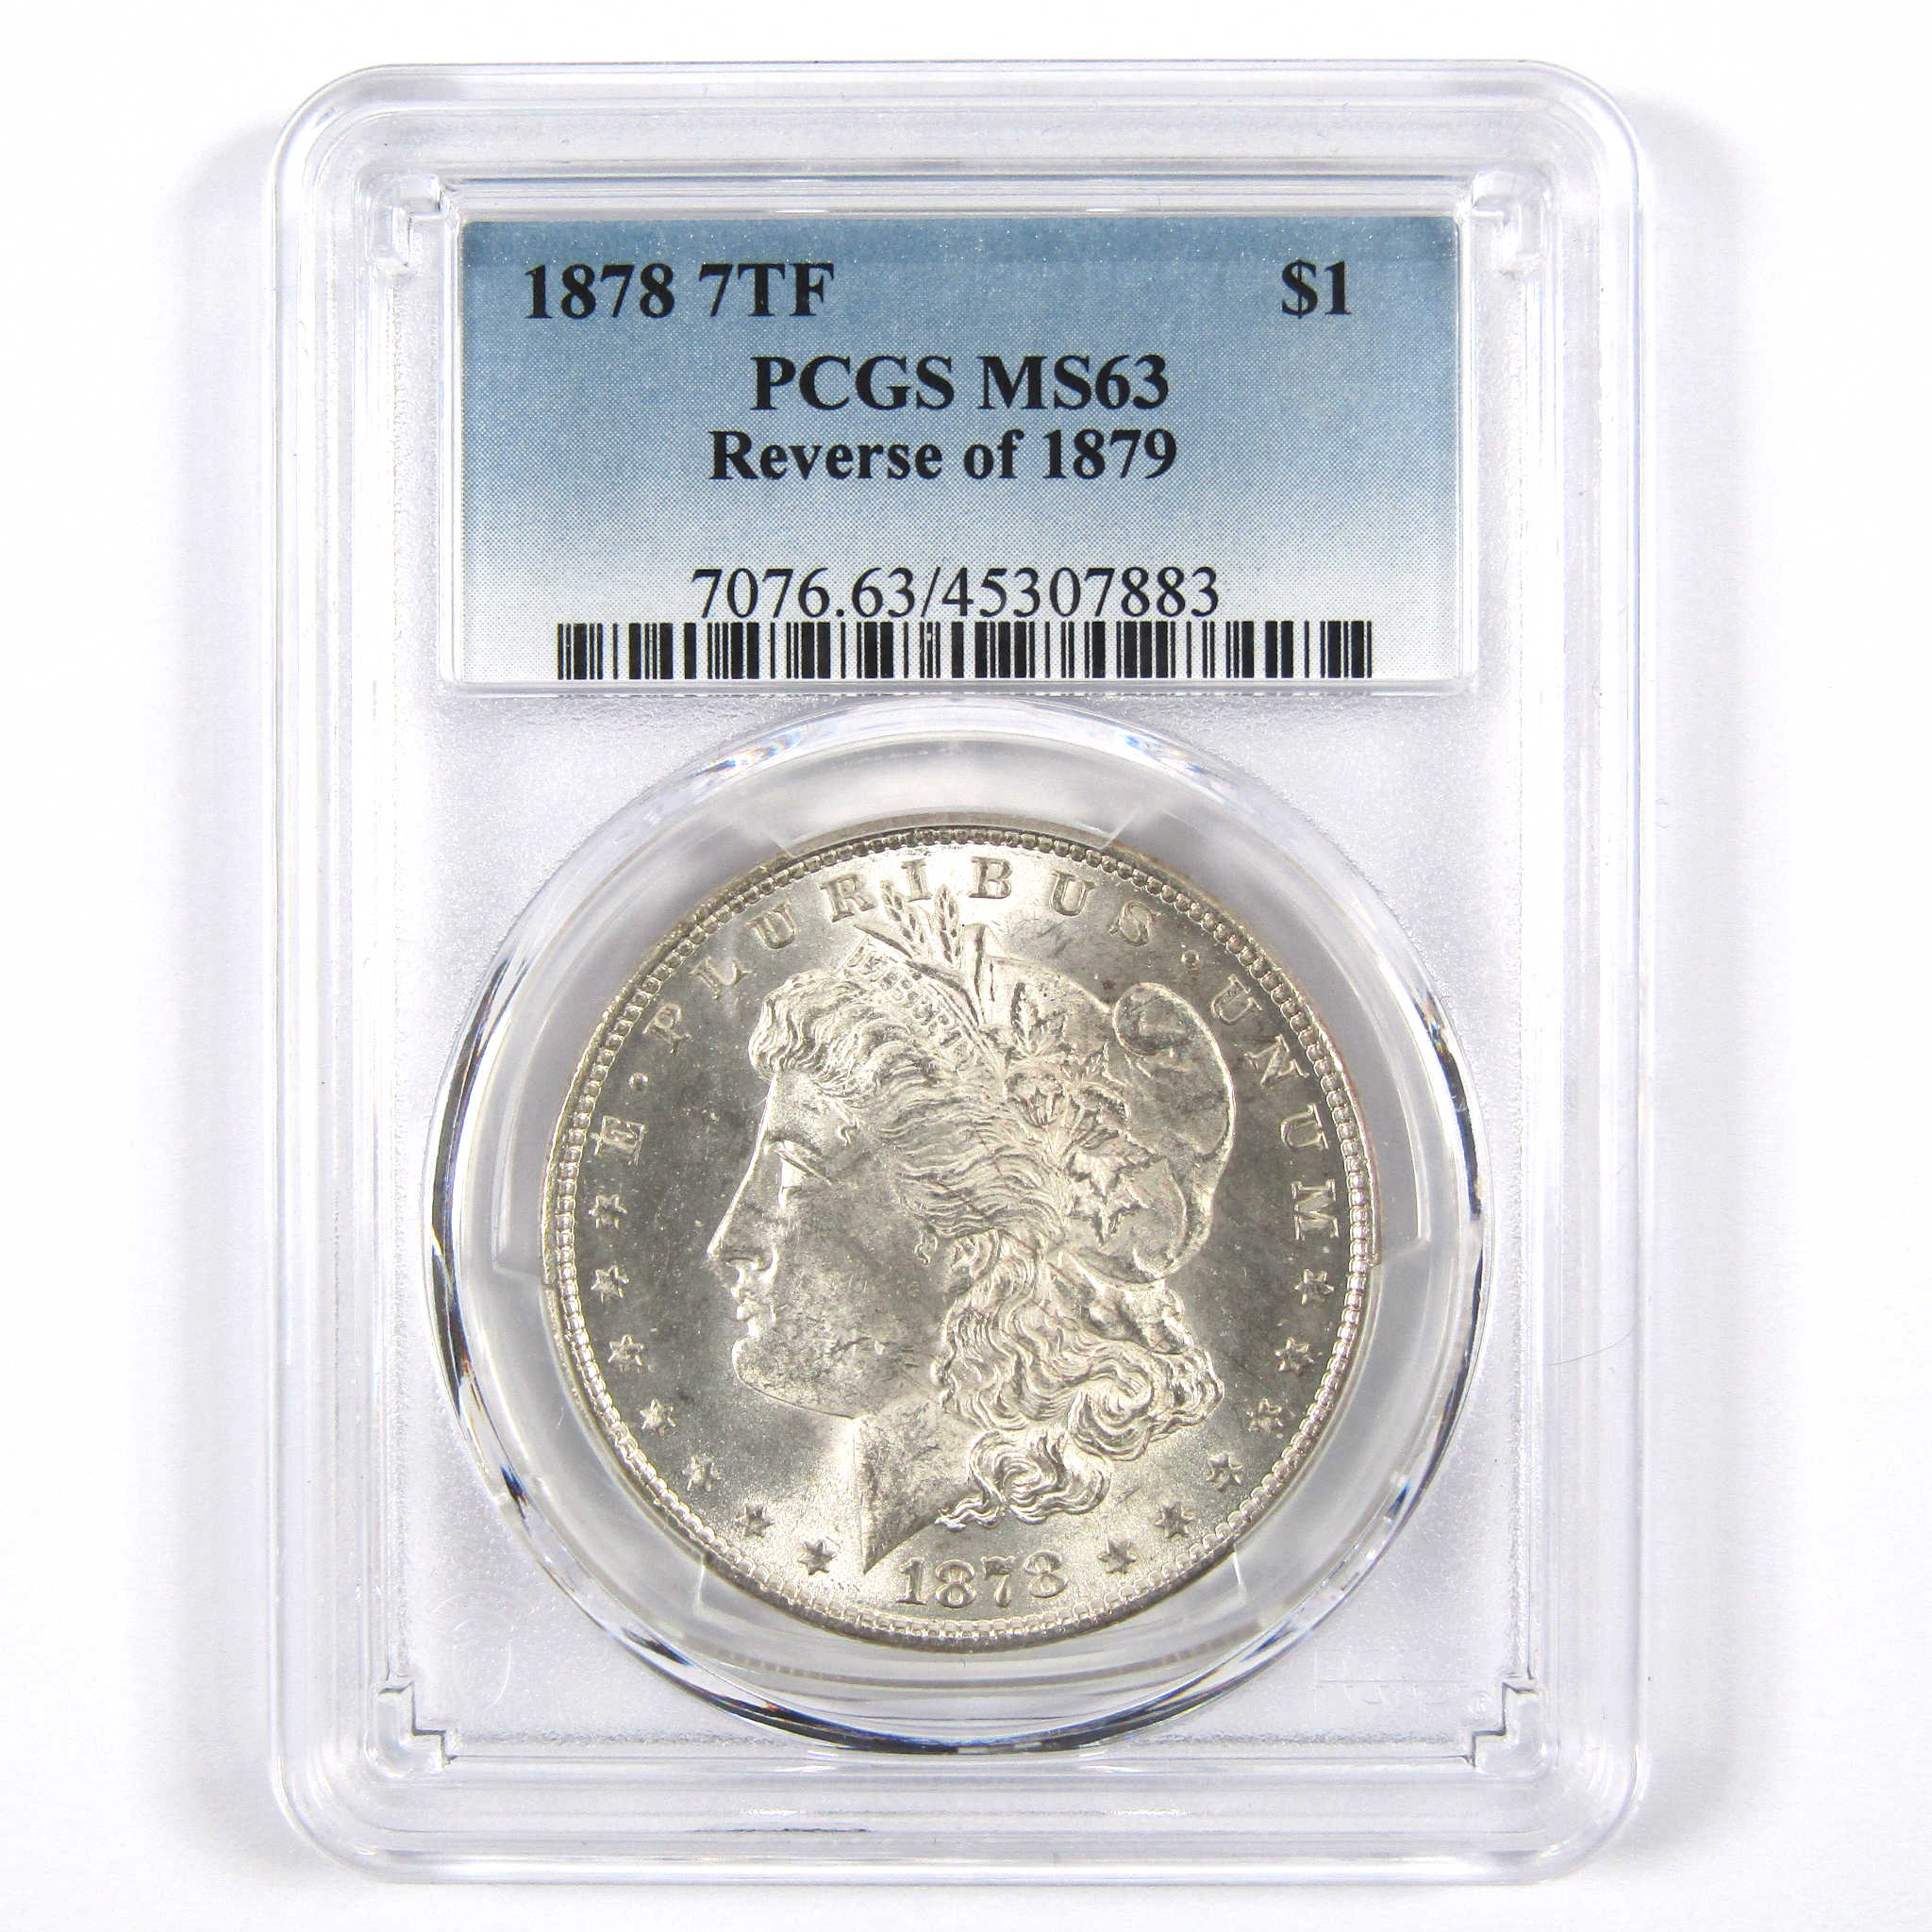 1878 7TF Rev 79 Morgan Dollar MS 63 PCGS 90% Silver $1 Unc SKU:I7545 - Morgan coin - Morgan silver dollar - Morgan silver dollar for sale - Profile Coins &amp; Collectibles